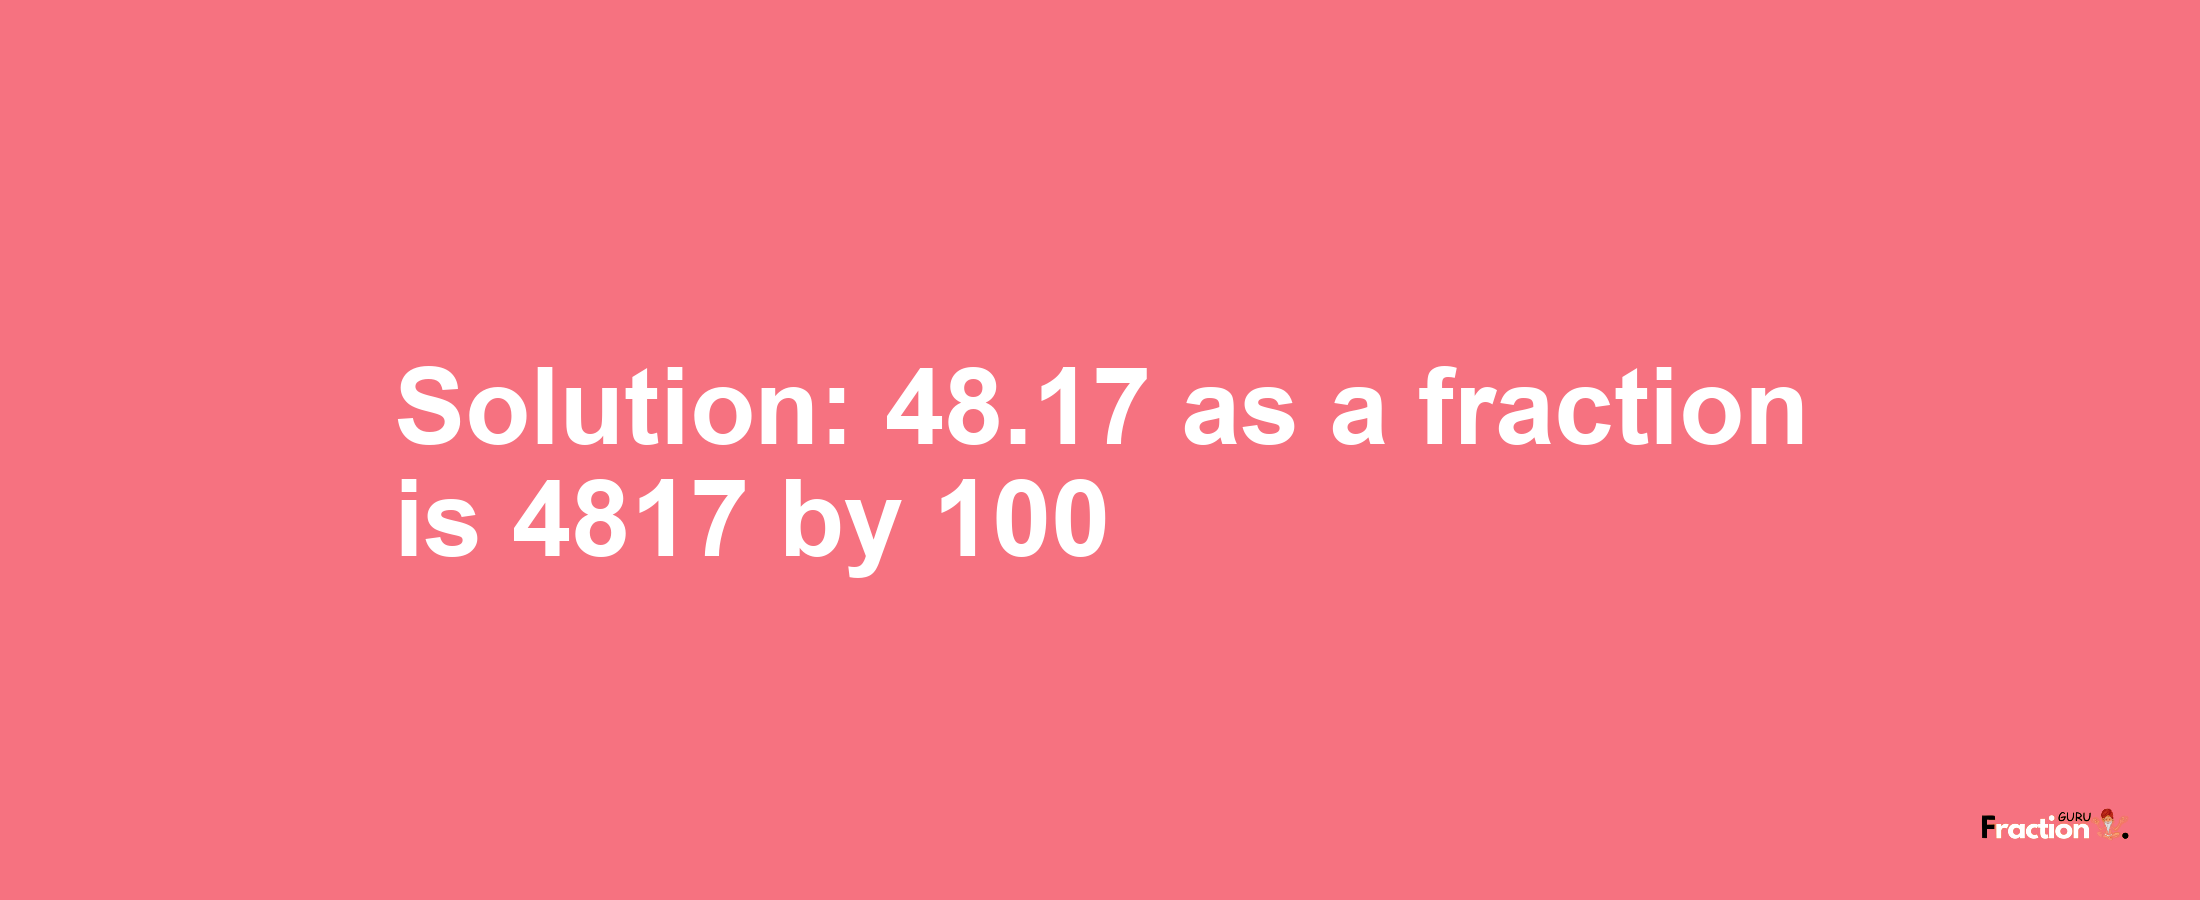 Solution:48.17 as a fraction is 4817/100